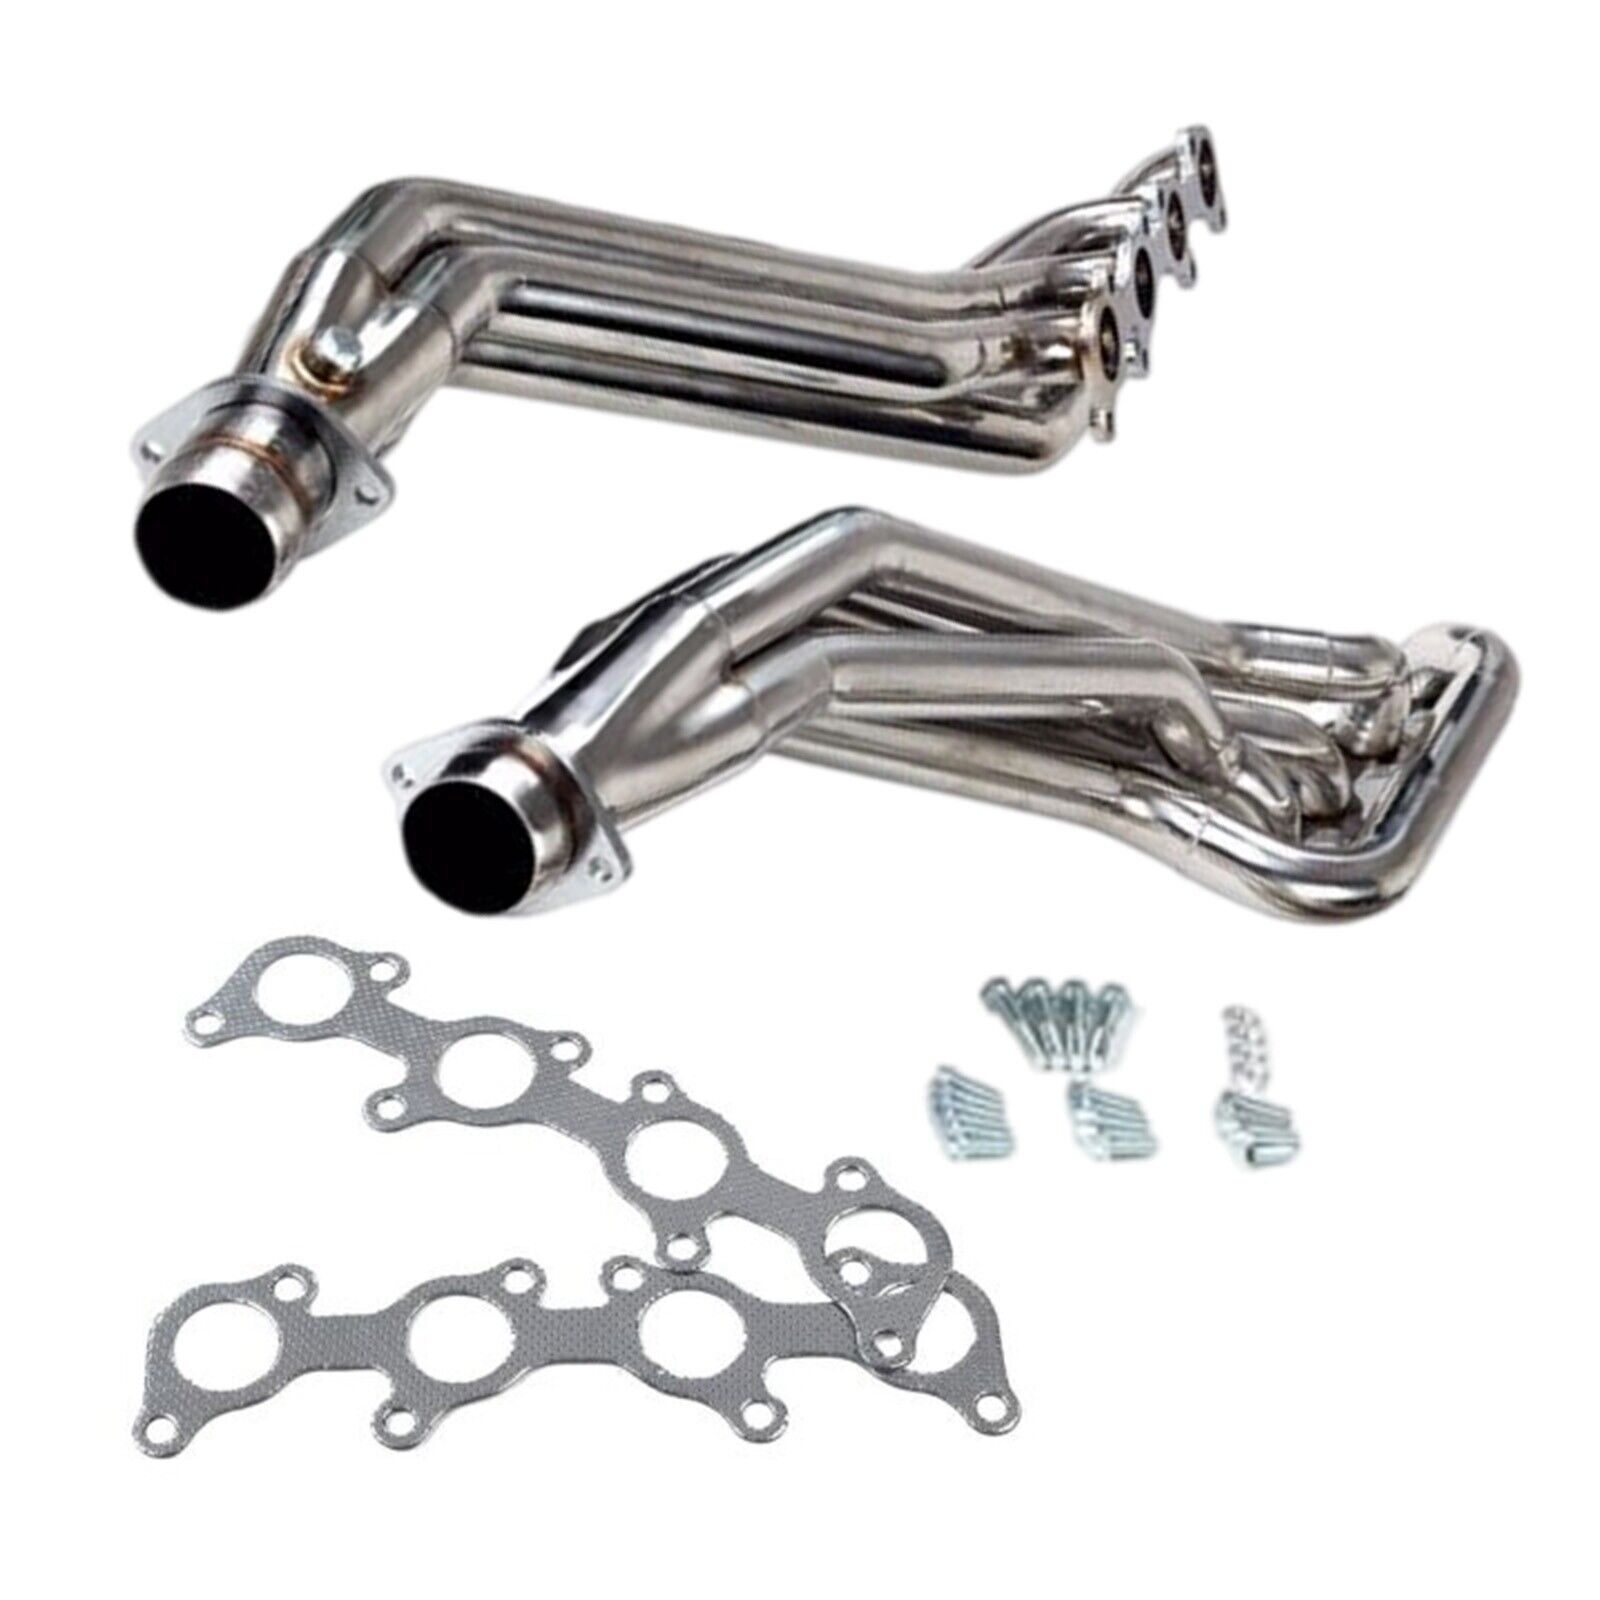 Exhaust Manifold Headers FIT For Ford MUSTANG 11-16 GT 5.0/302 V8 USAGH